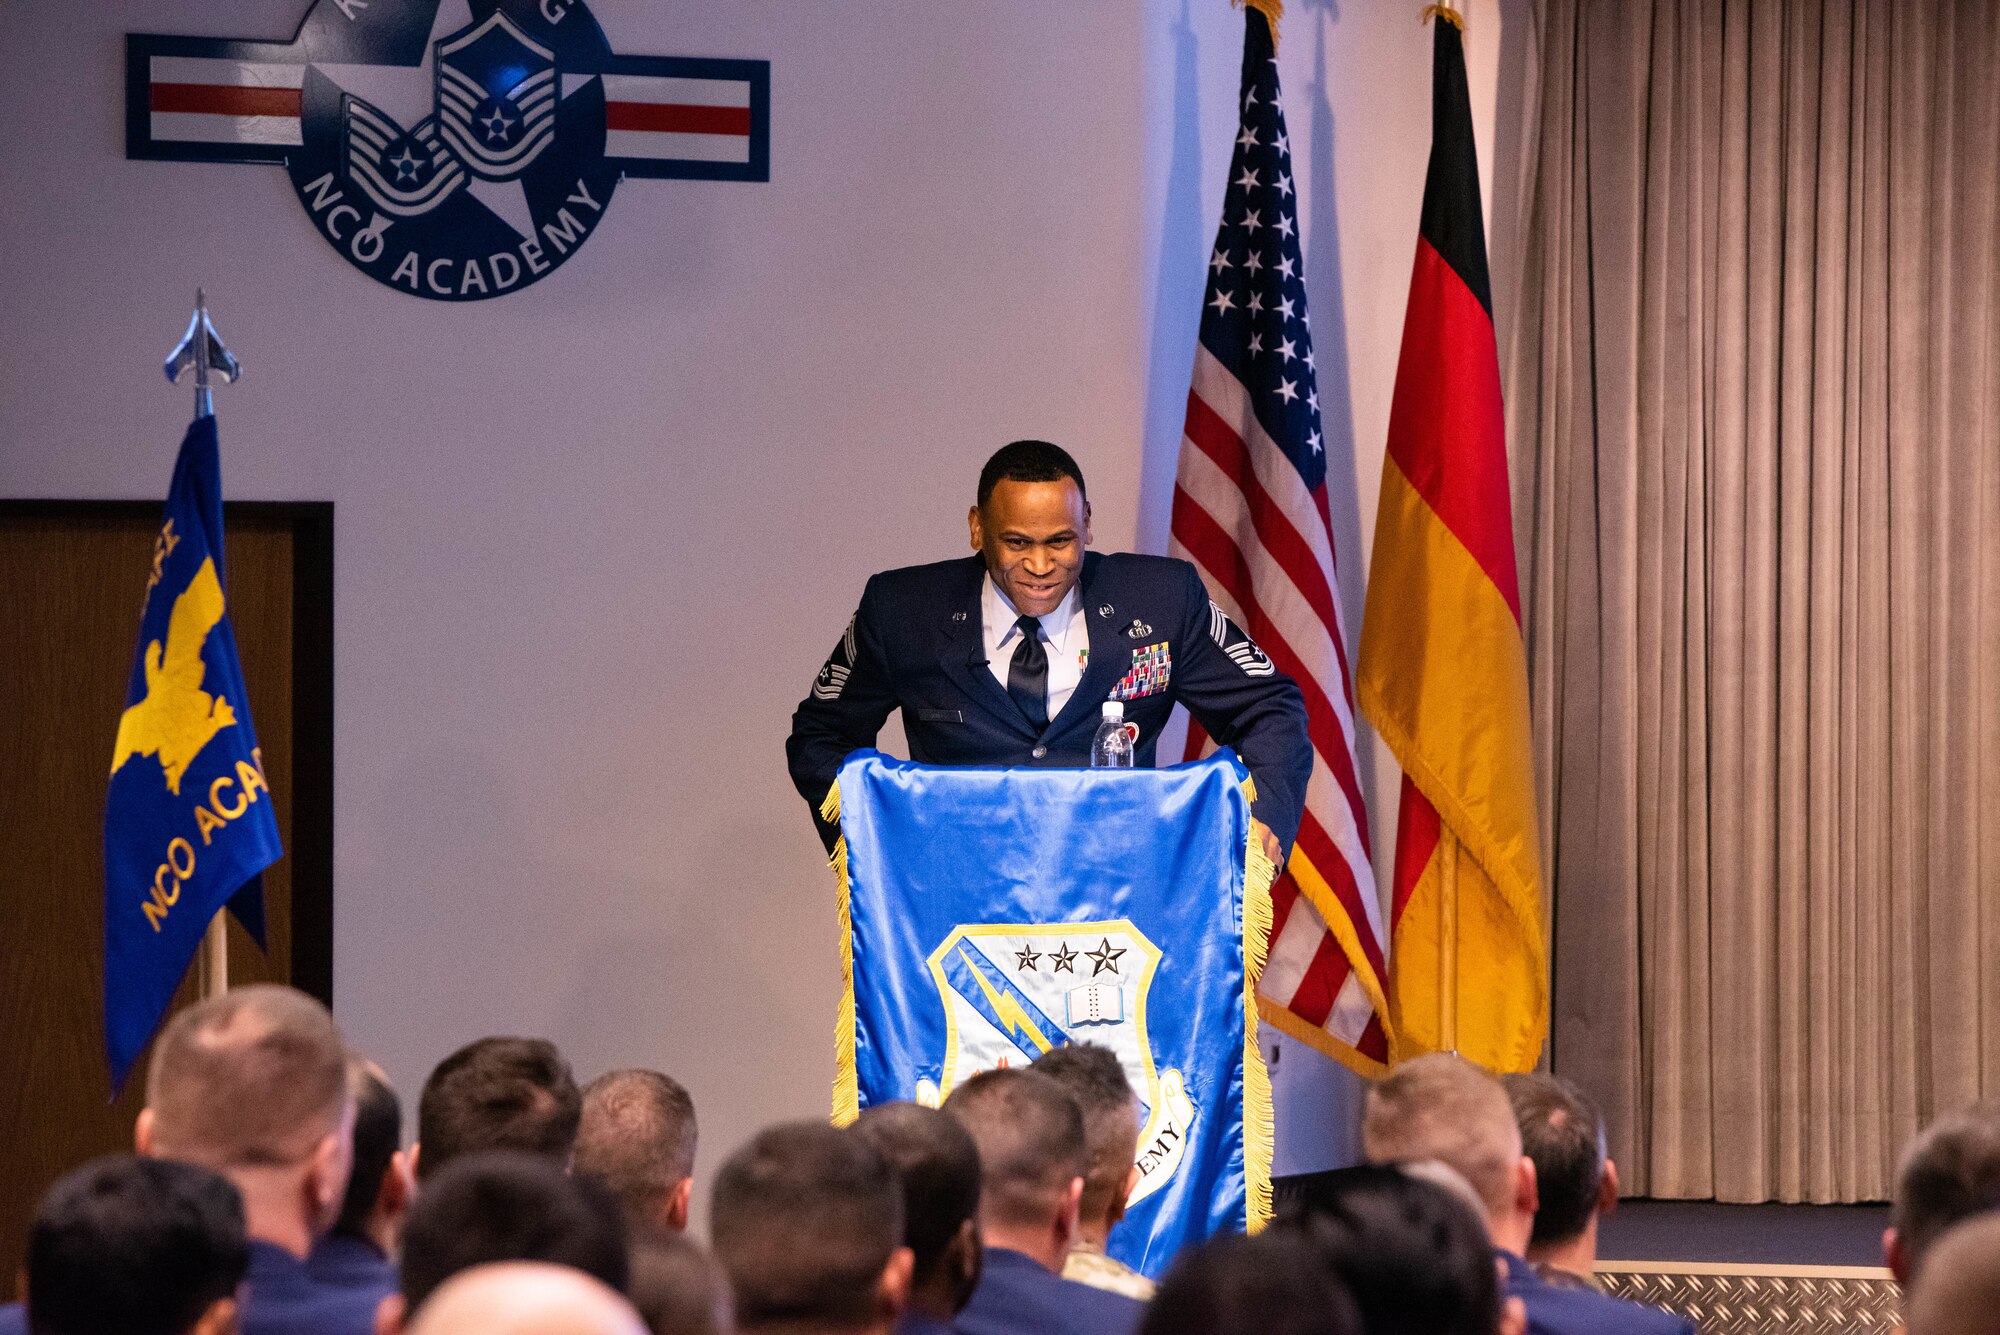 U.S. Air Force Chief Master Sgt. Terrance Smiley, Kisling Noncommissioned Officer Academy commandant, addresses attendees during a ribbon cutting event for the reopening of the NCOA on Kapaun Air Station, Germany, Nov. 1, 2019. Kisling NCOA was closed for six months to complete renovations in order to improve the educational environment for students and instructors. (Courtesy Photo)